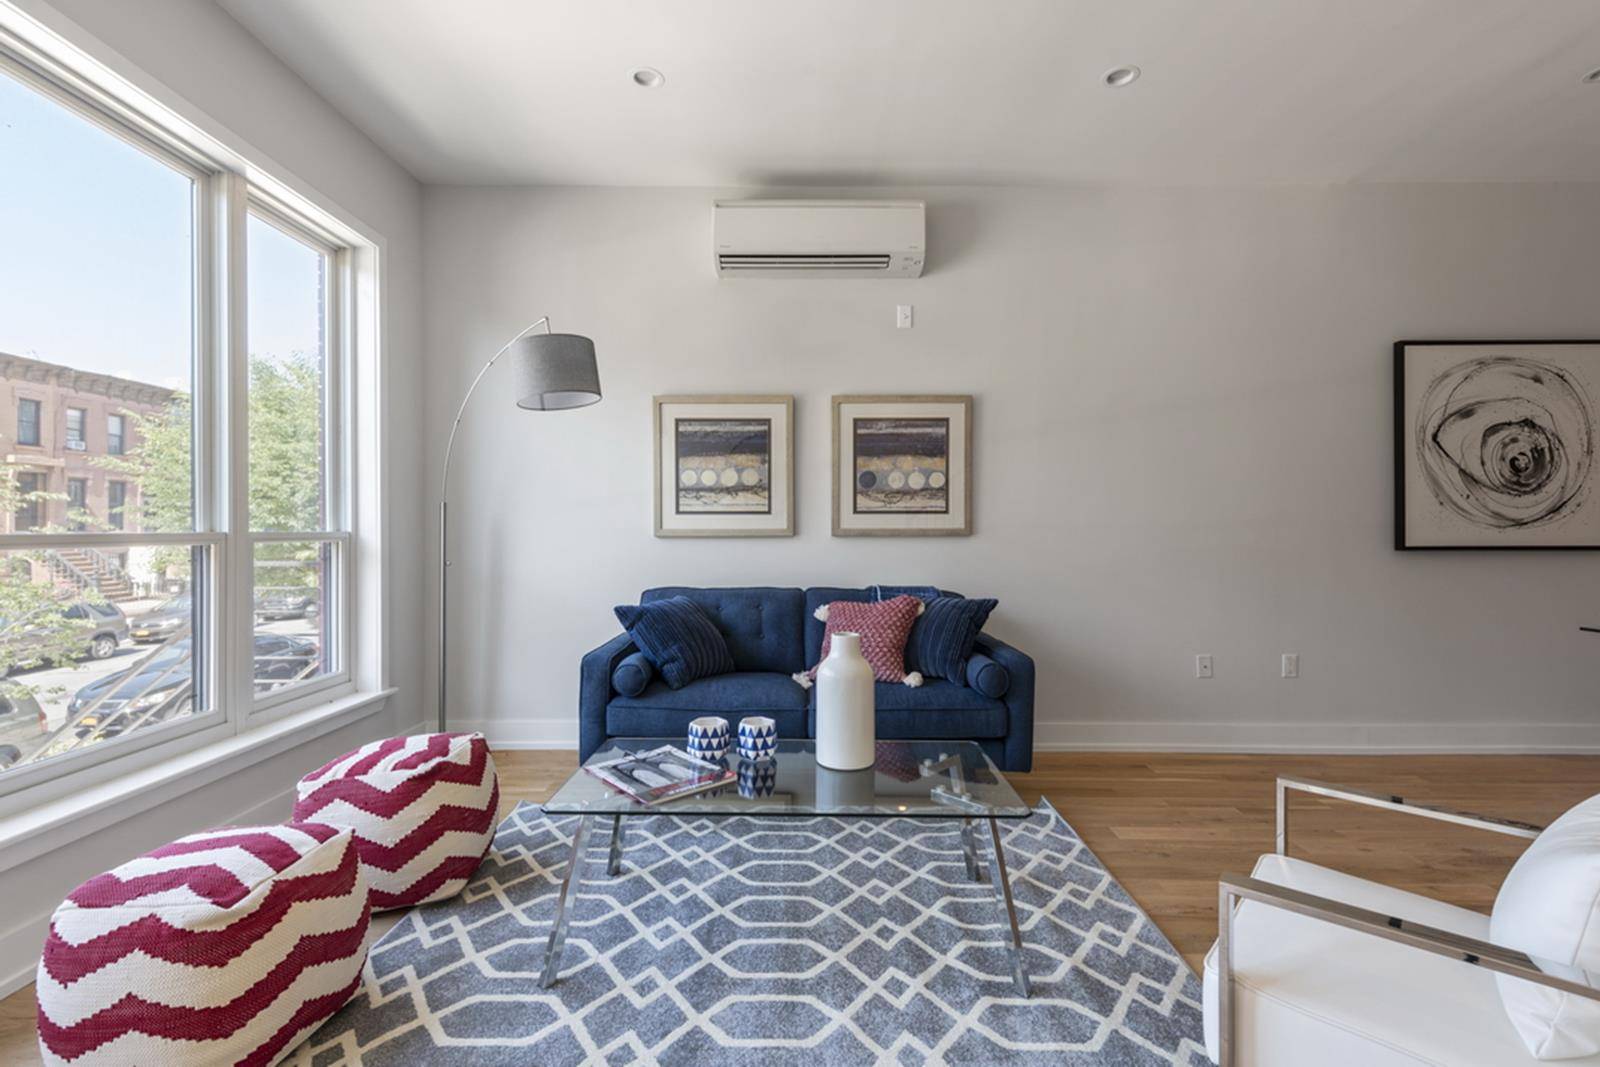 Boasting an array of modern finishes and saturated with natural light, this gut renovated 2 family townhouse is a portrait of contemporary Brooklyn living.